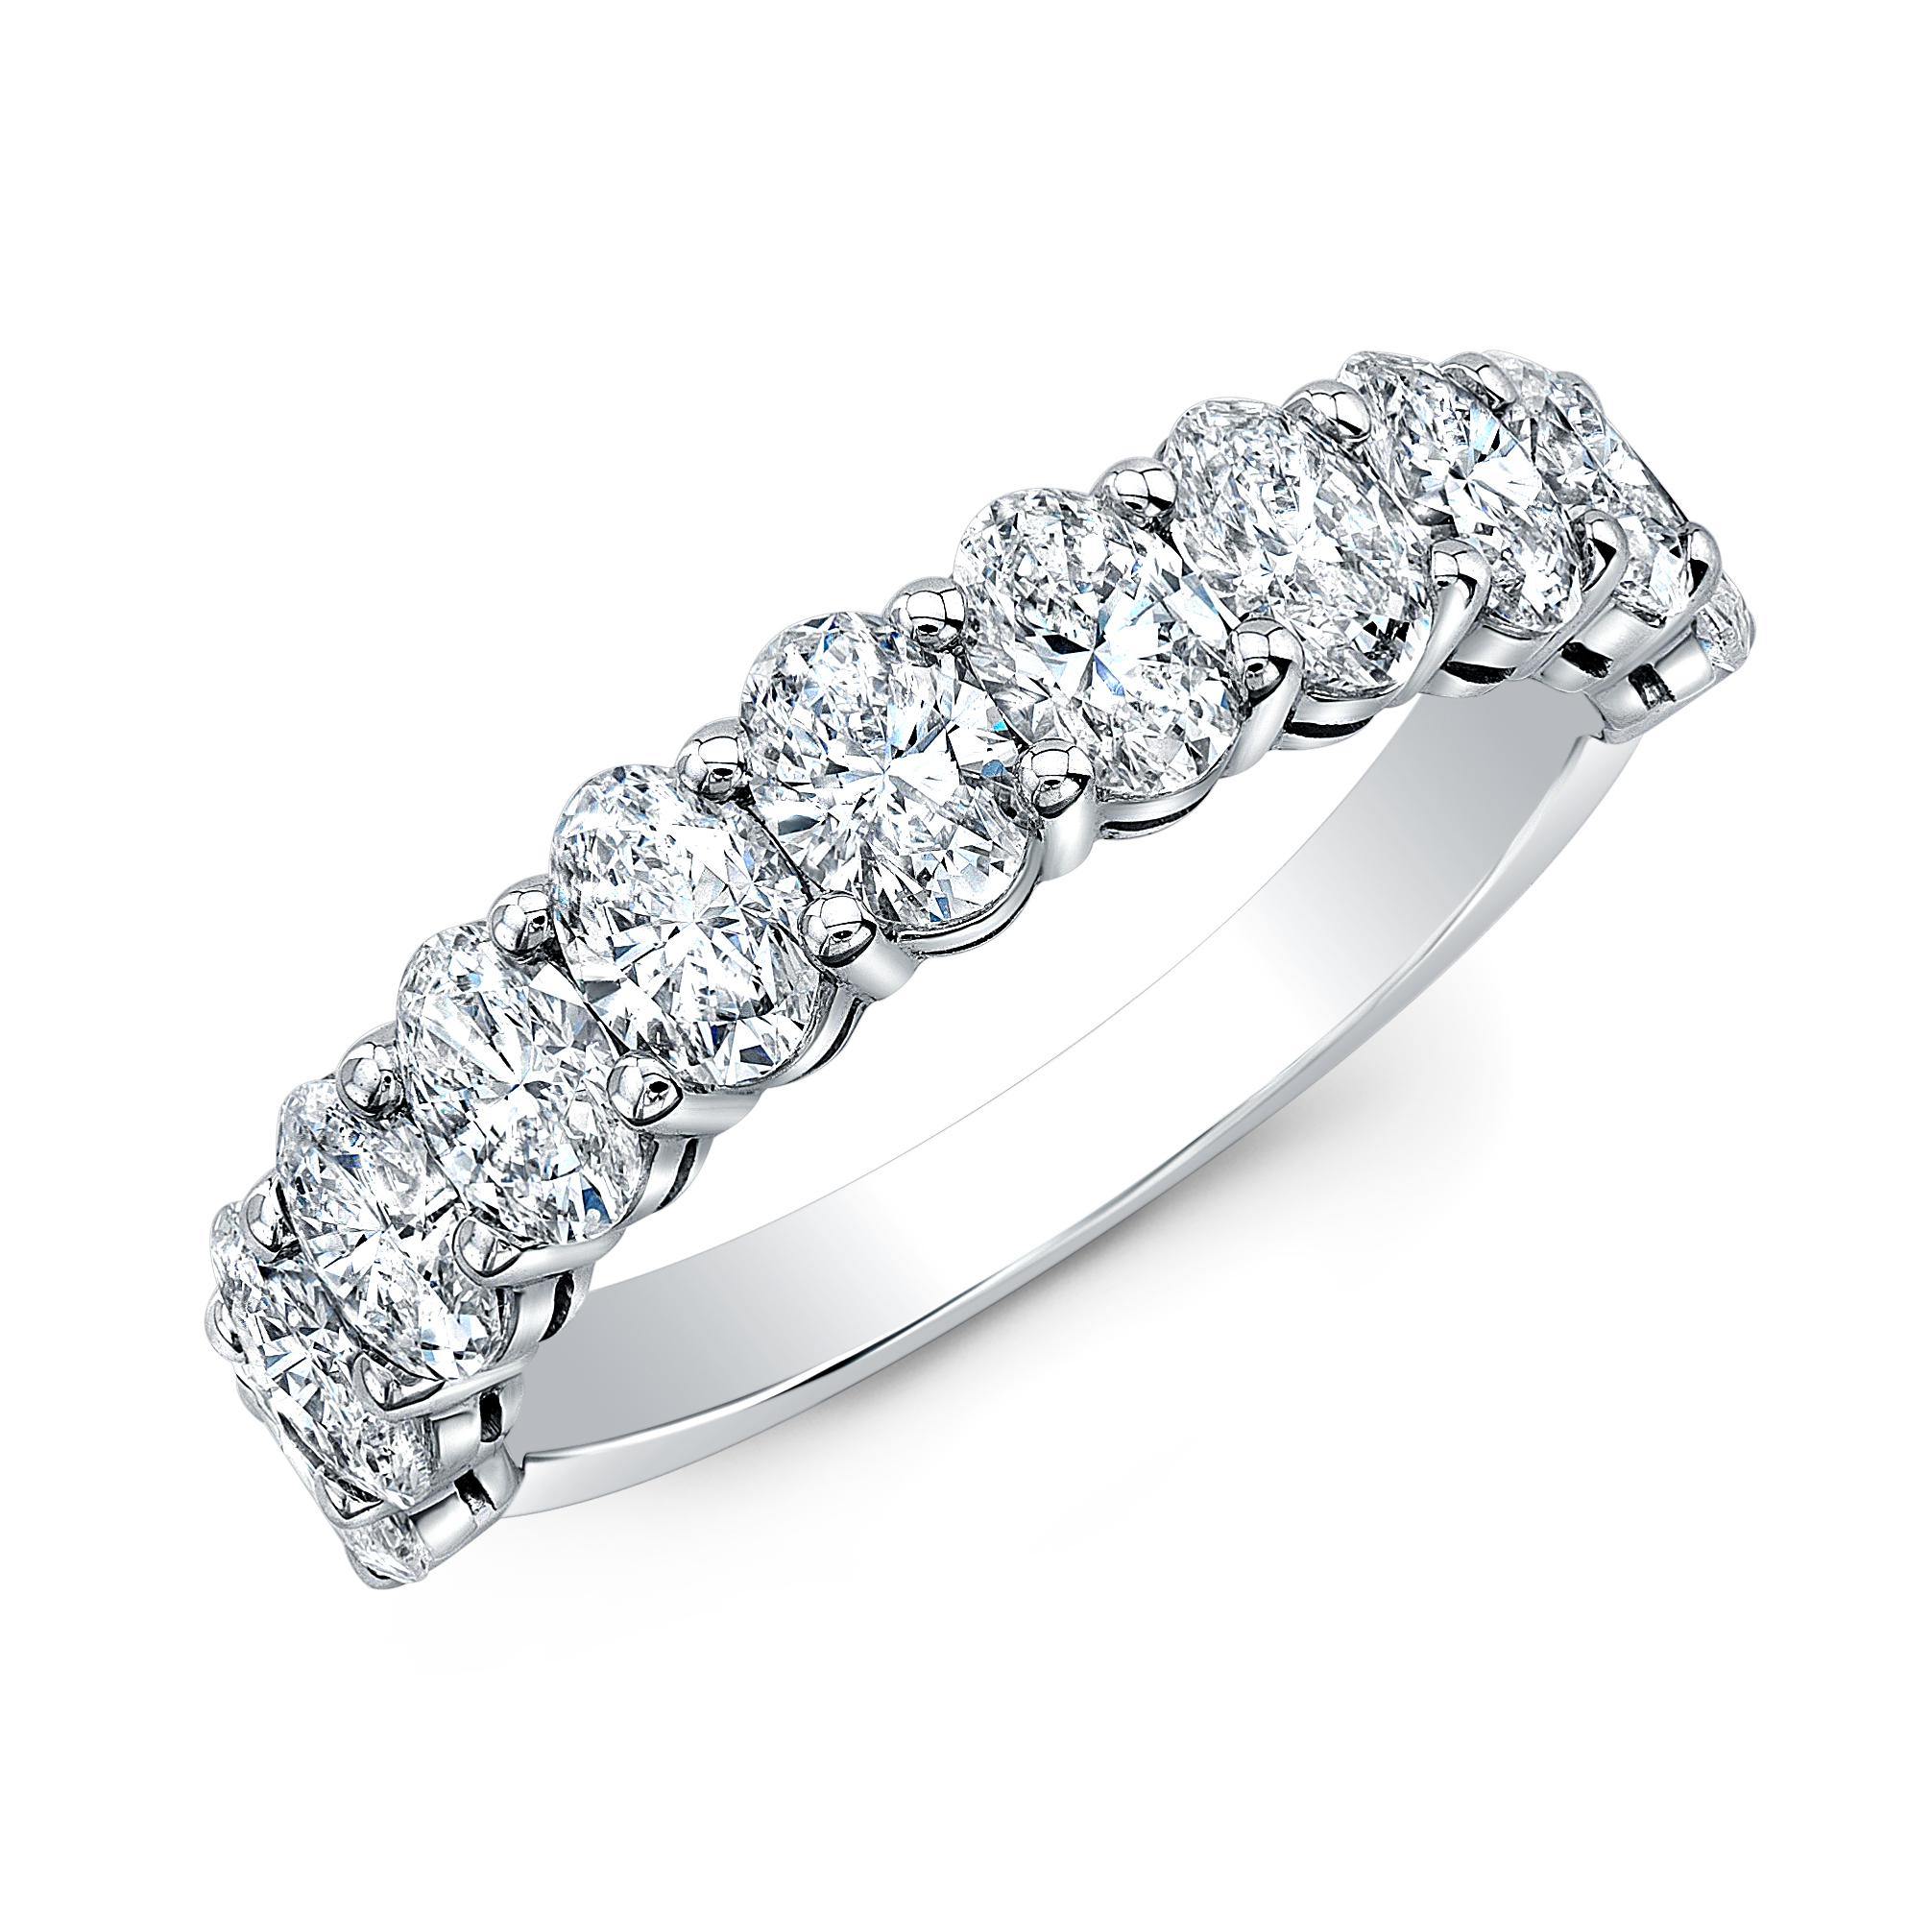 Halfway Eternity Band with Oval Cut Diamonds set in platinum.
11 stones 2.66 carat total weight  
Ring size 6.5
